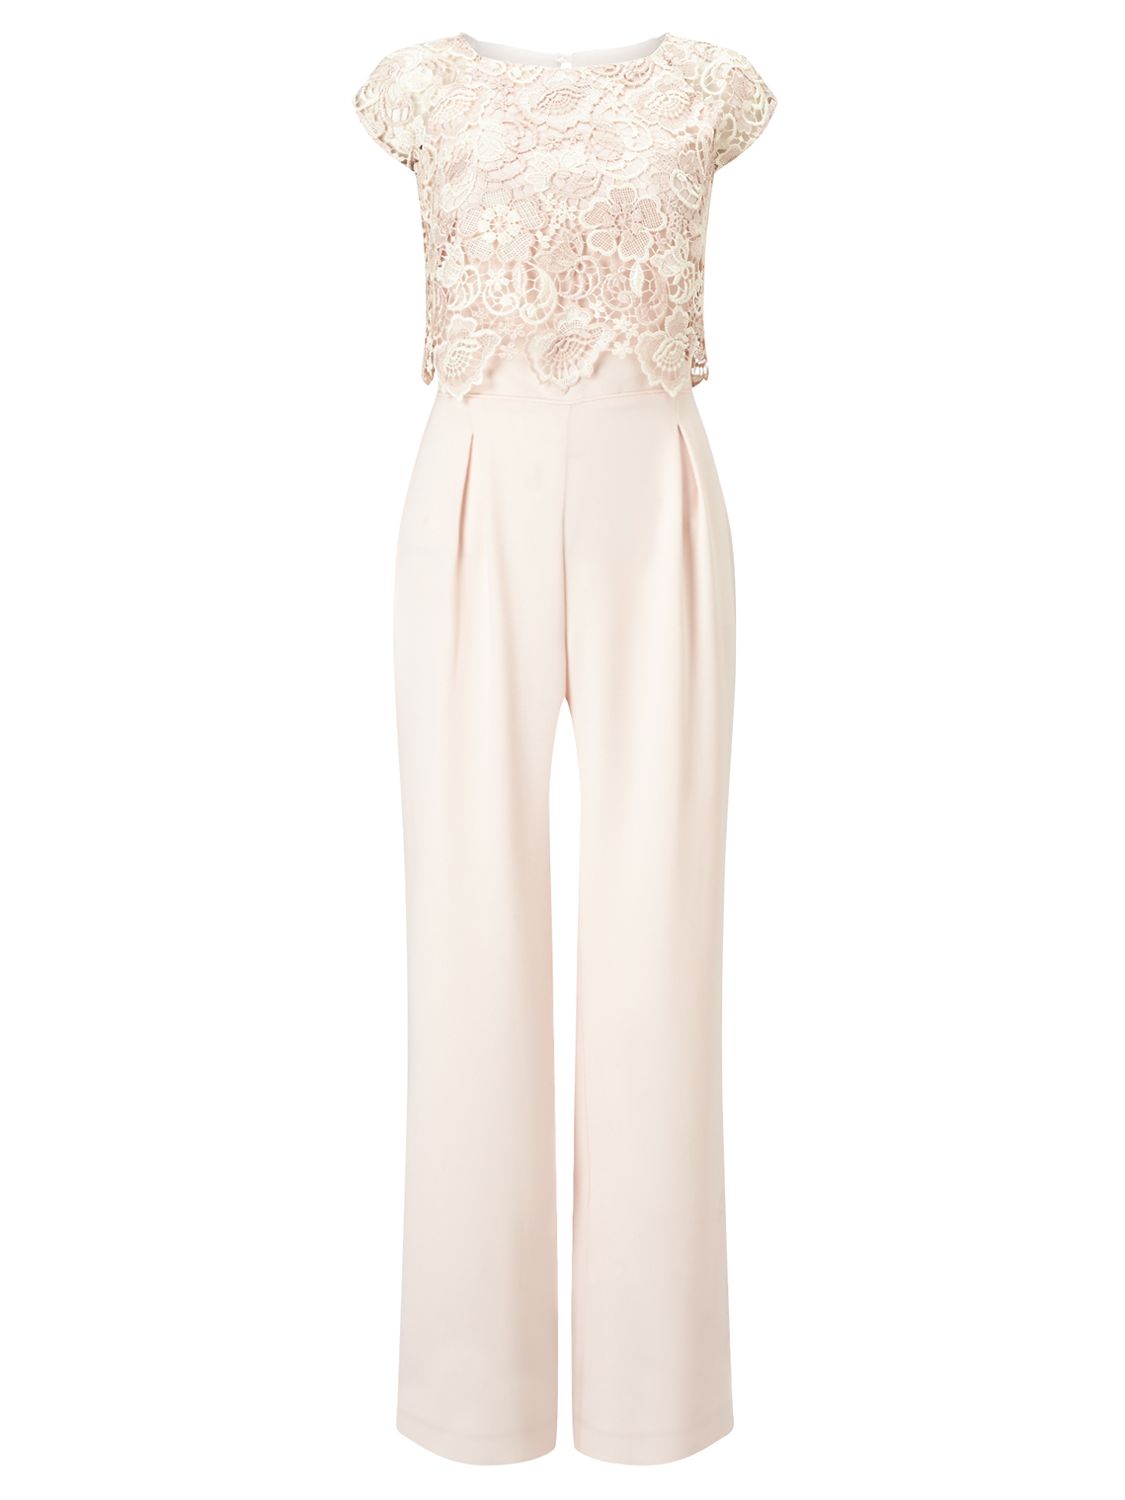 Phase Eight Cortine Lace Bodice Jumpsuit, Ivory/Petal at John Lewis